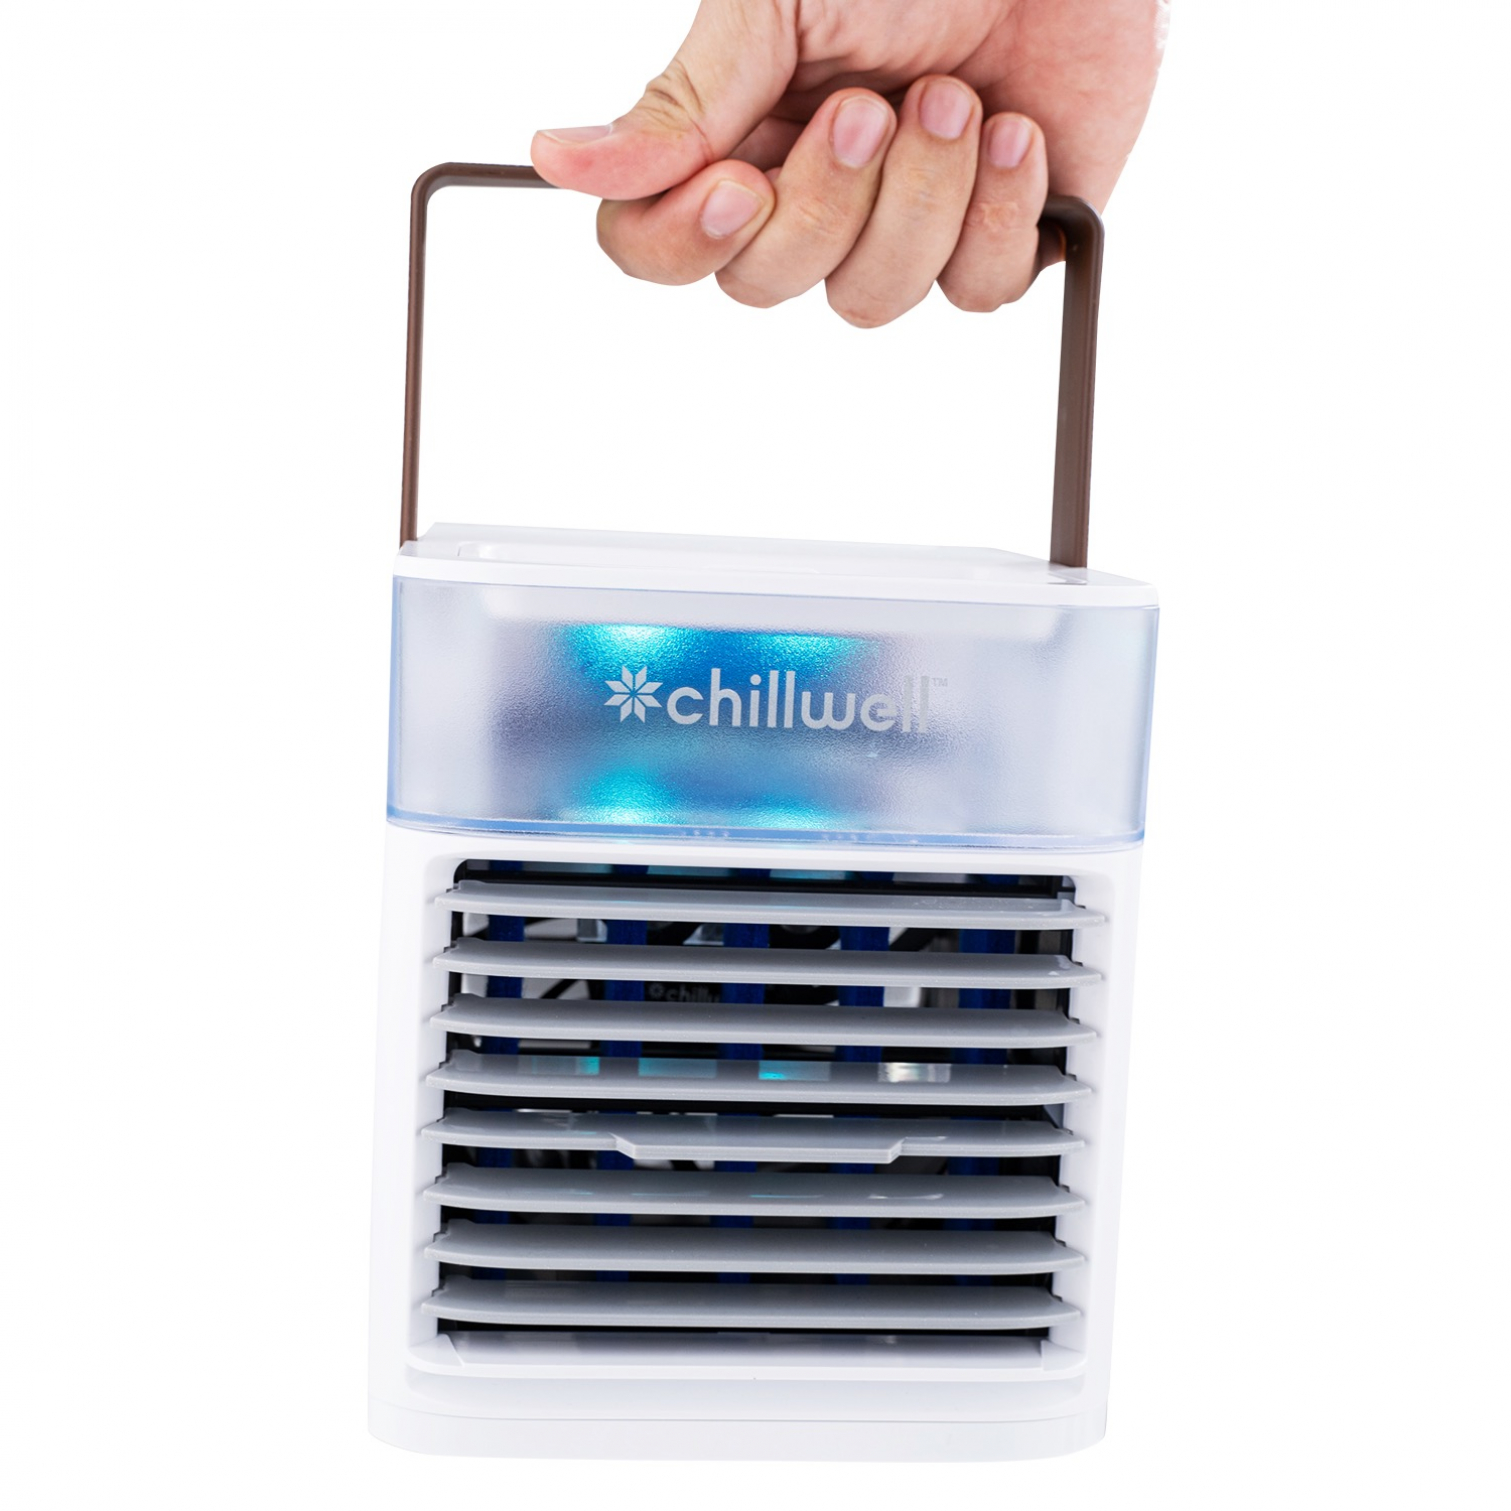 Buy Chillwell AC Reviews